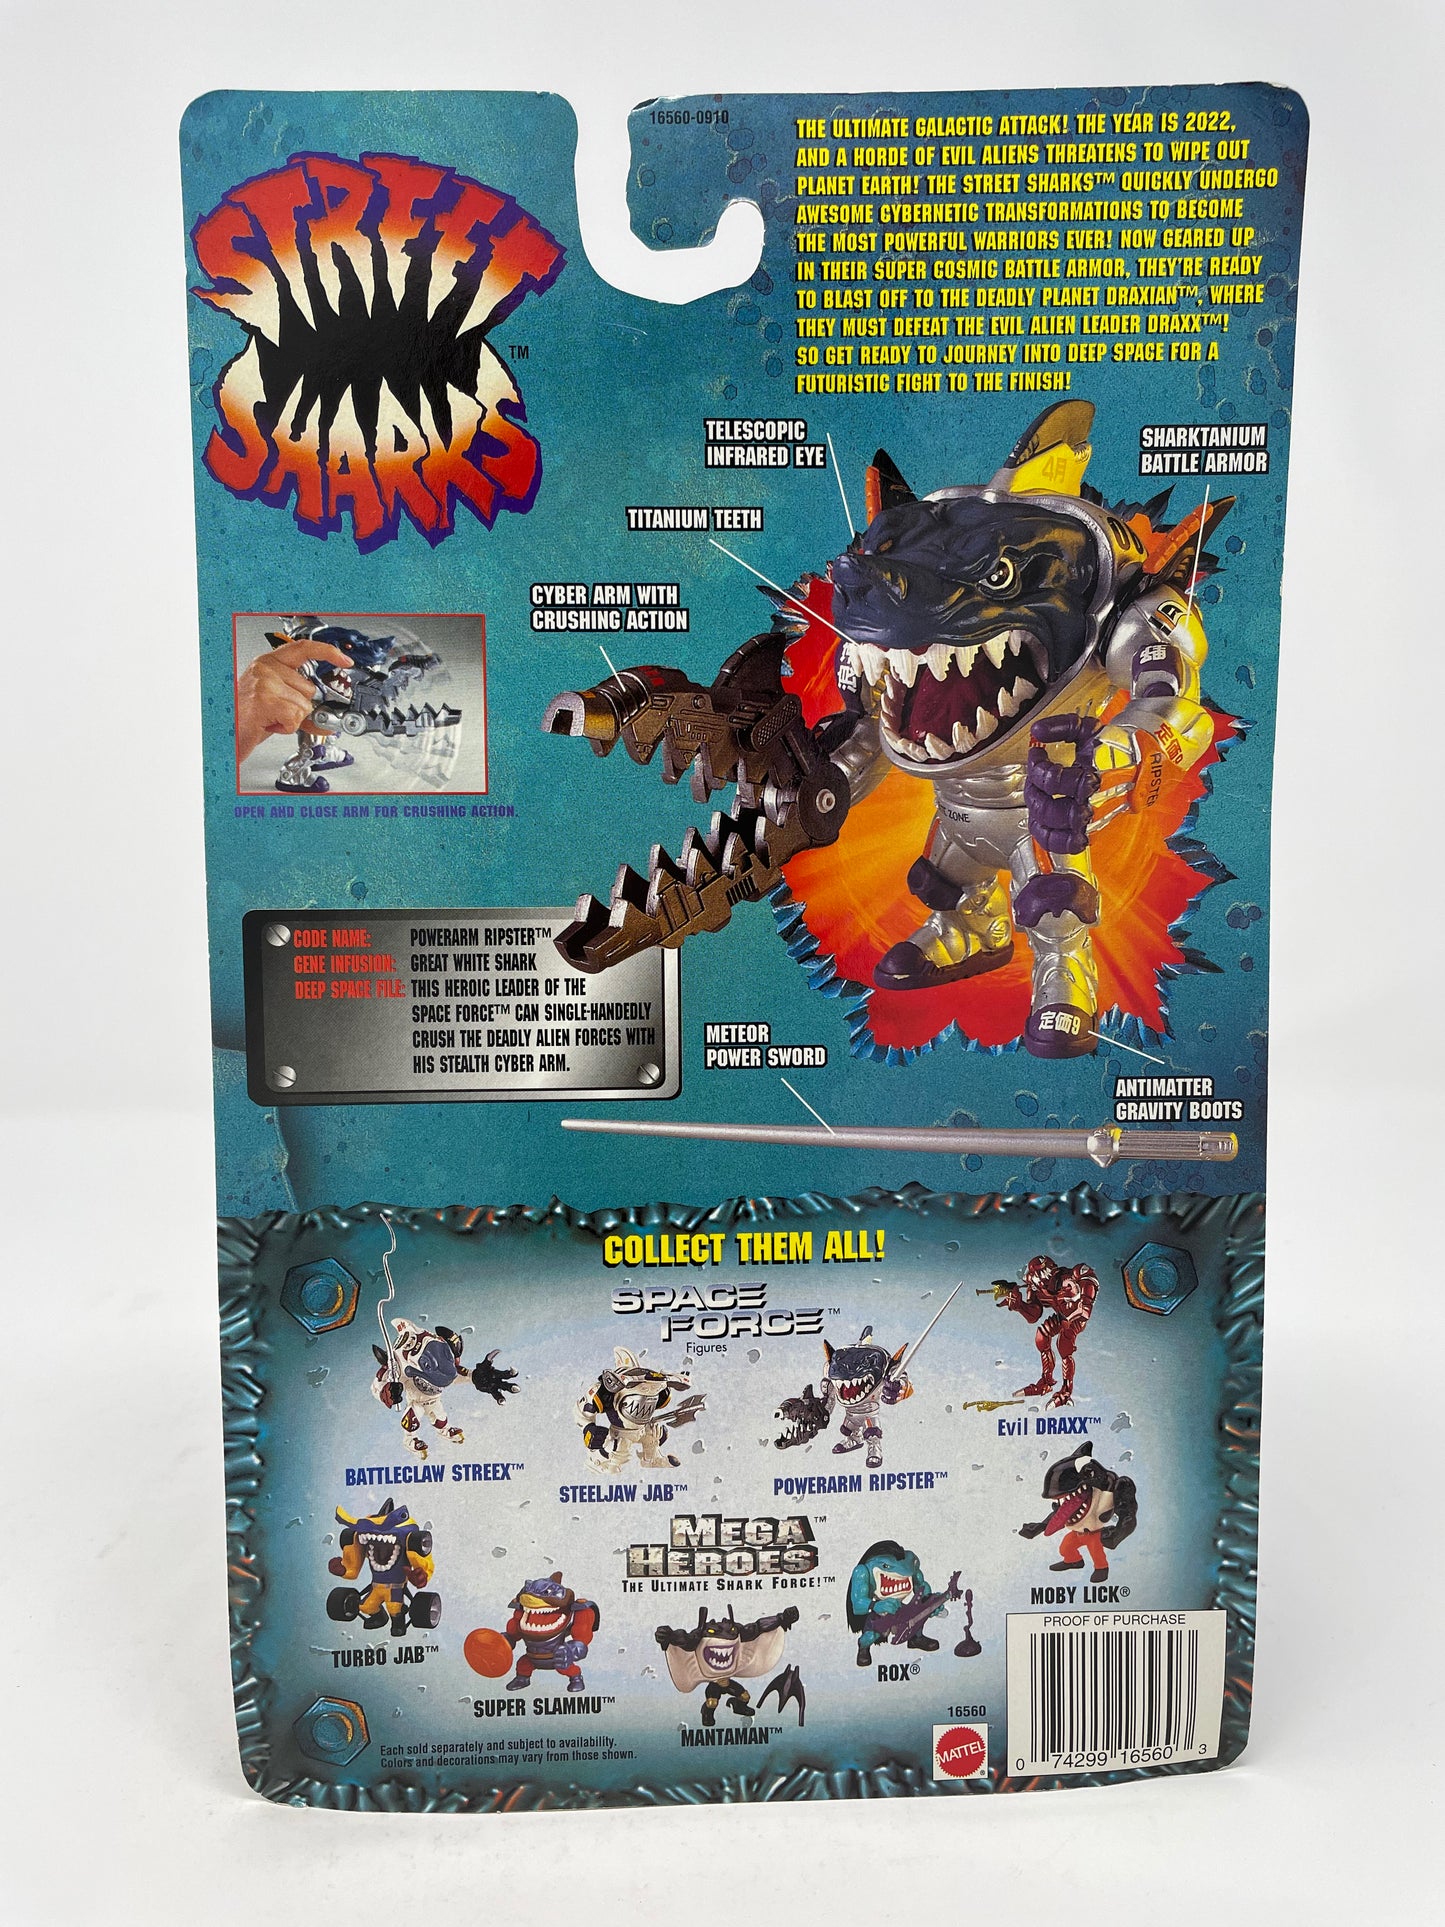 PowerArm Ripster - Street Sharks Space Force (5 of 6)